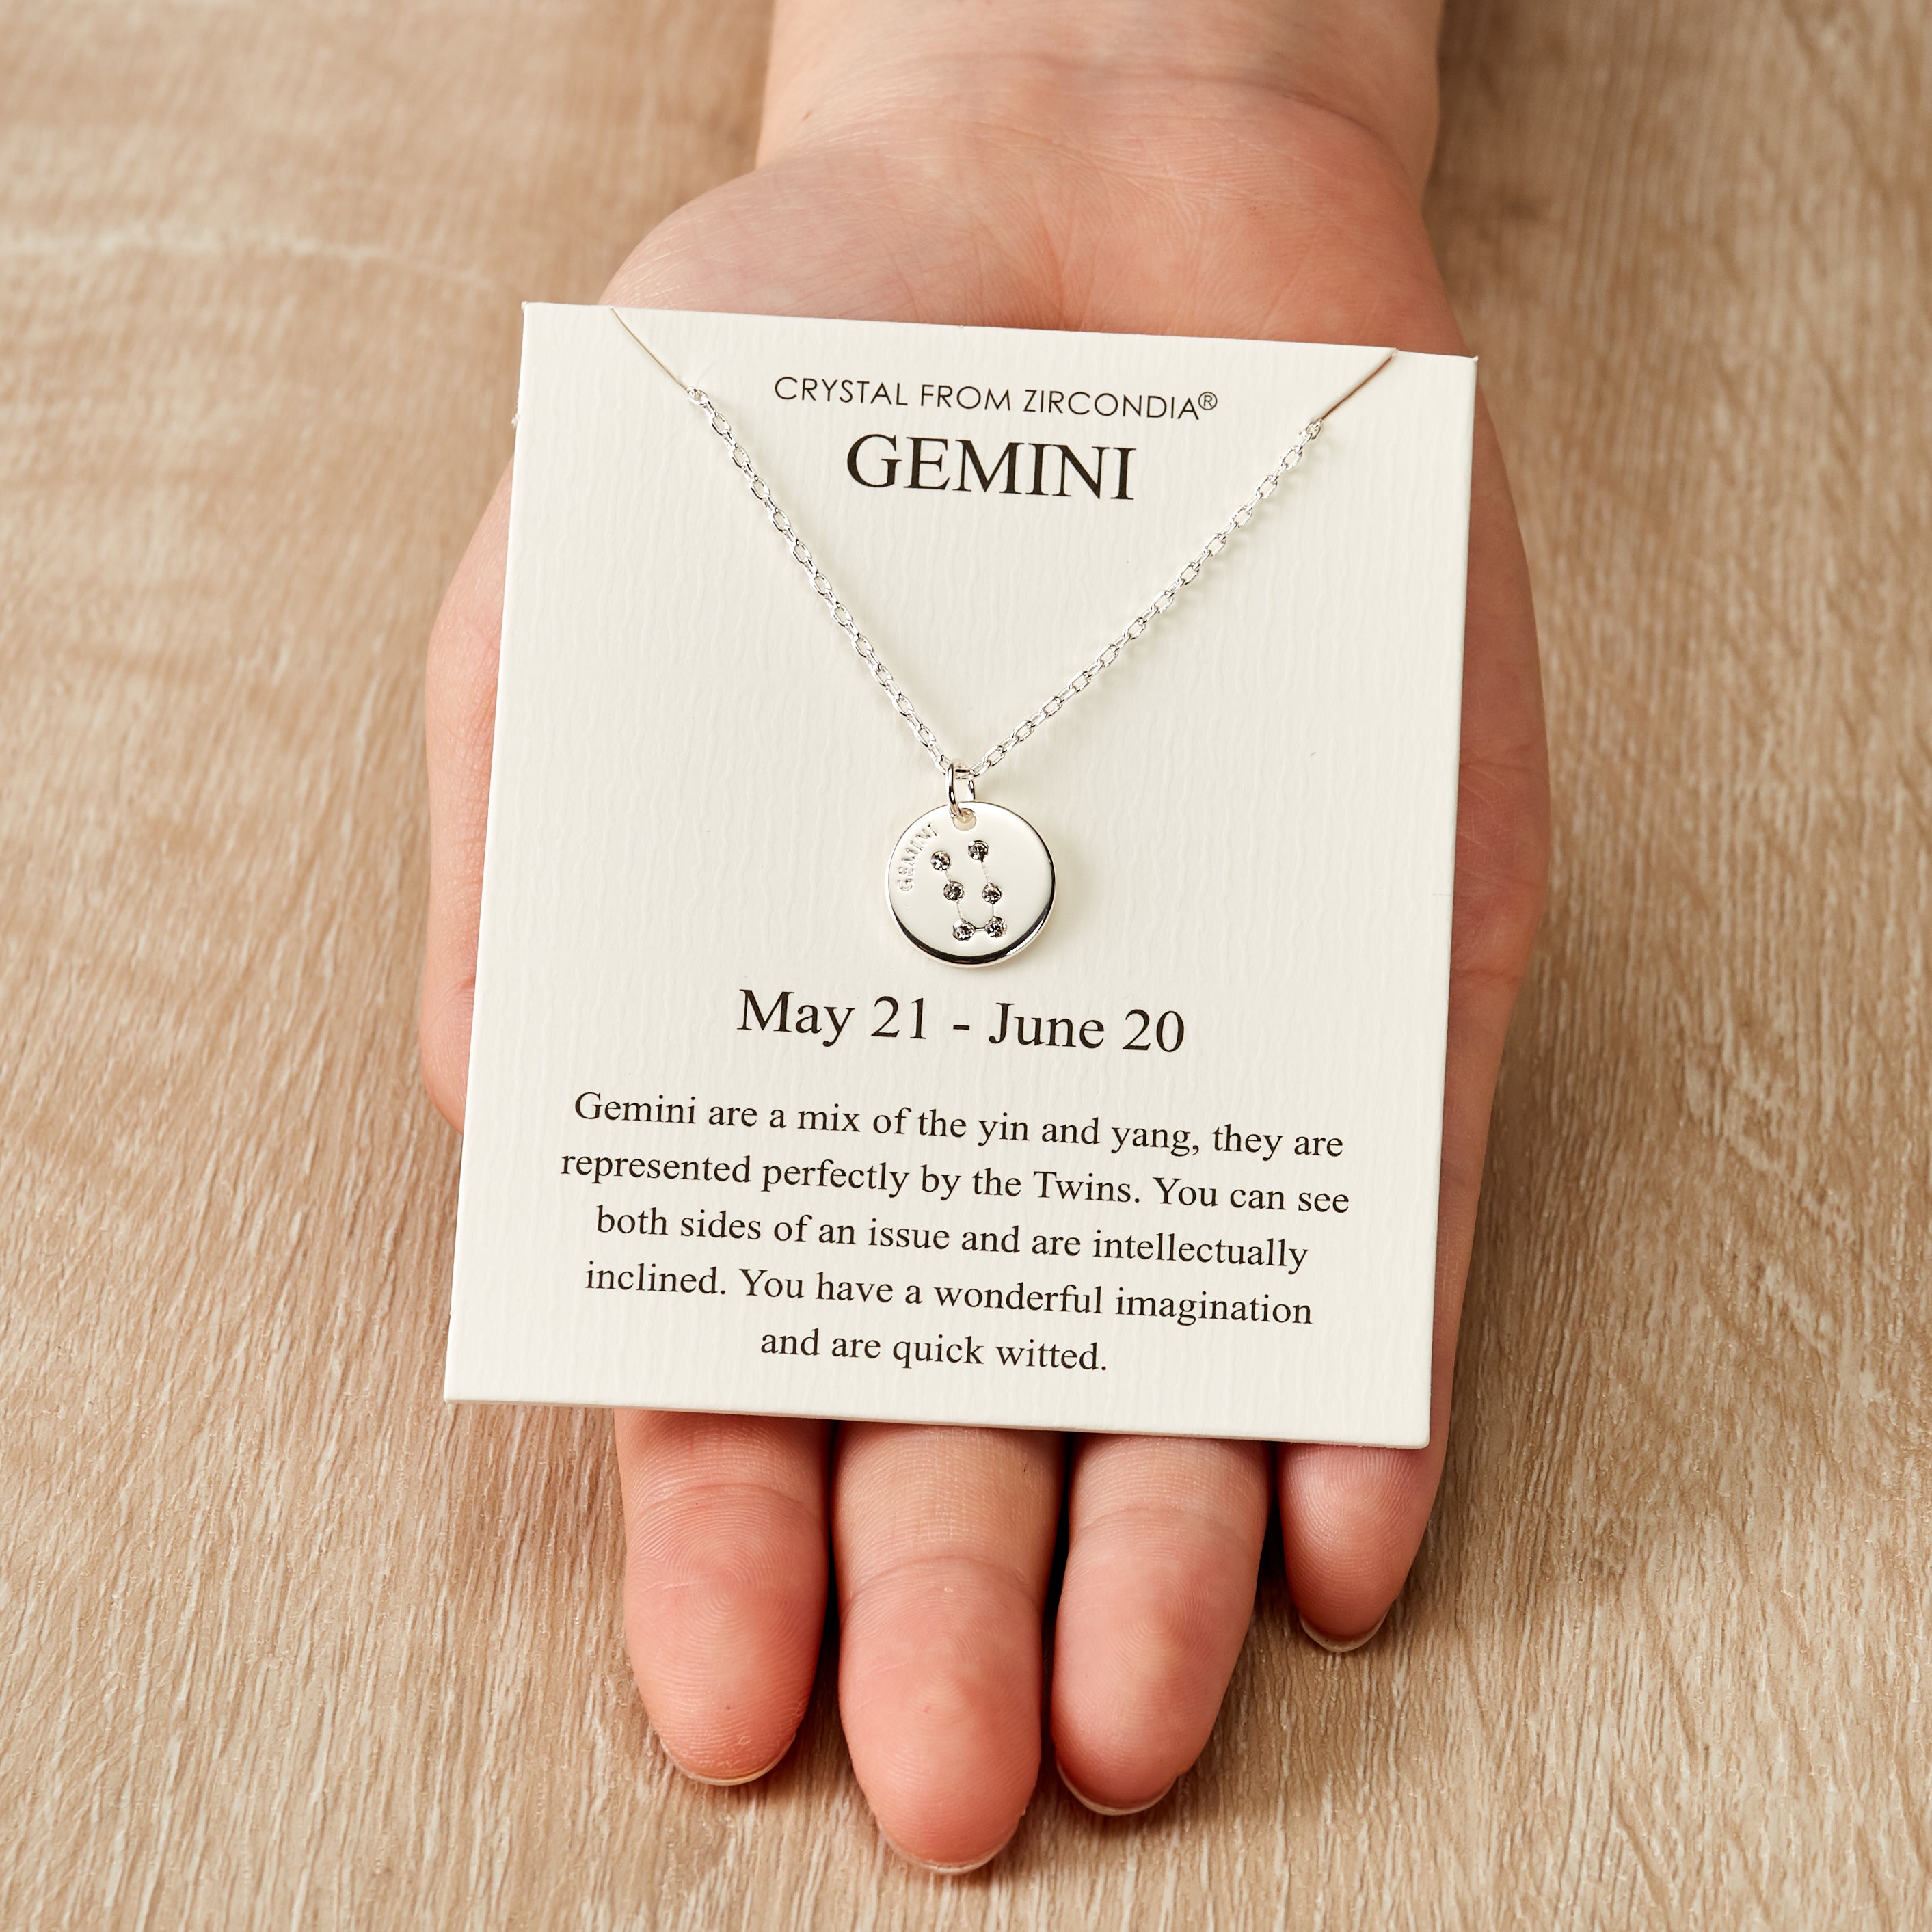 Gemini Zodiac Star Sign Disc Necklace Created with Zircondia® Crystals